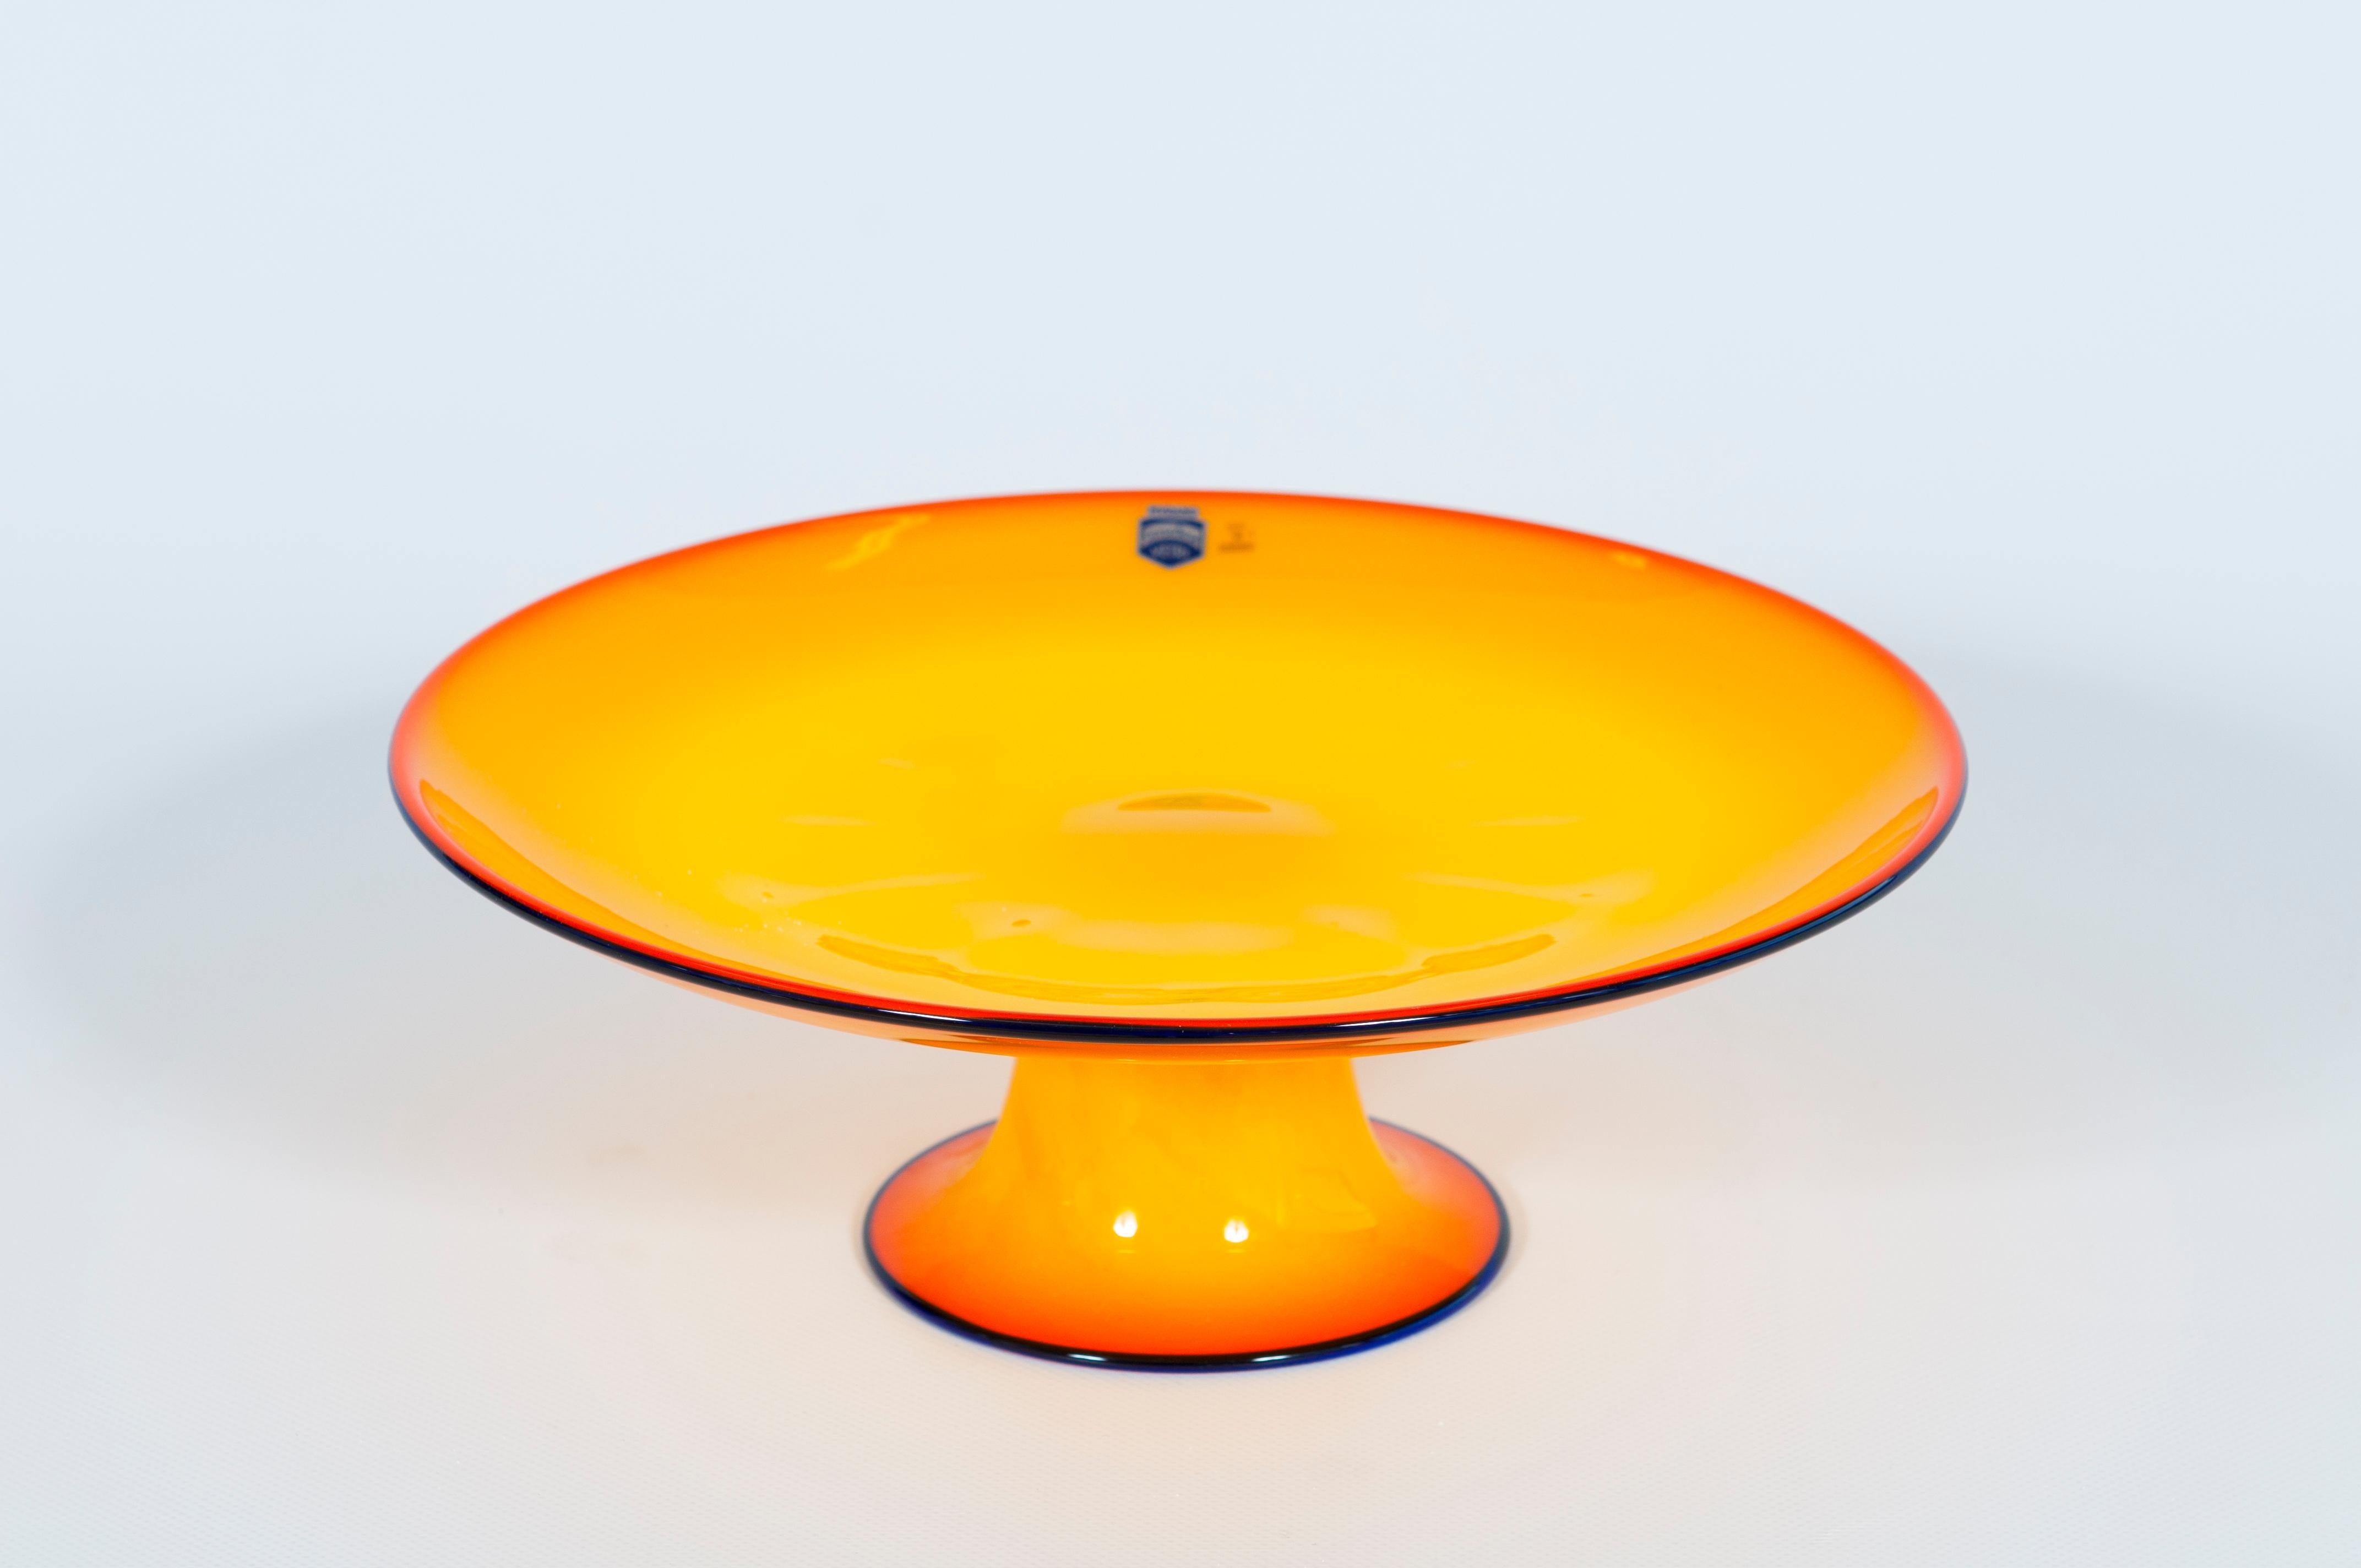 Original Cendese Footed Bowl in Sunny Yellow in blown Murano Glass 1980s Italy.
This bright footed bowl is an authentic creation of Cenedese, one of the most famous Venetian artists, known worldwide for its outstanding artworks in blown glass.